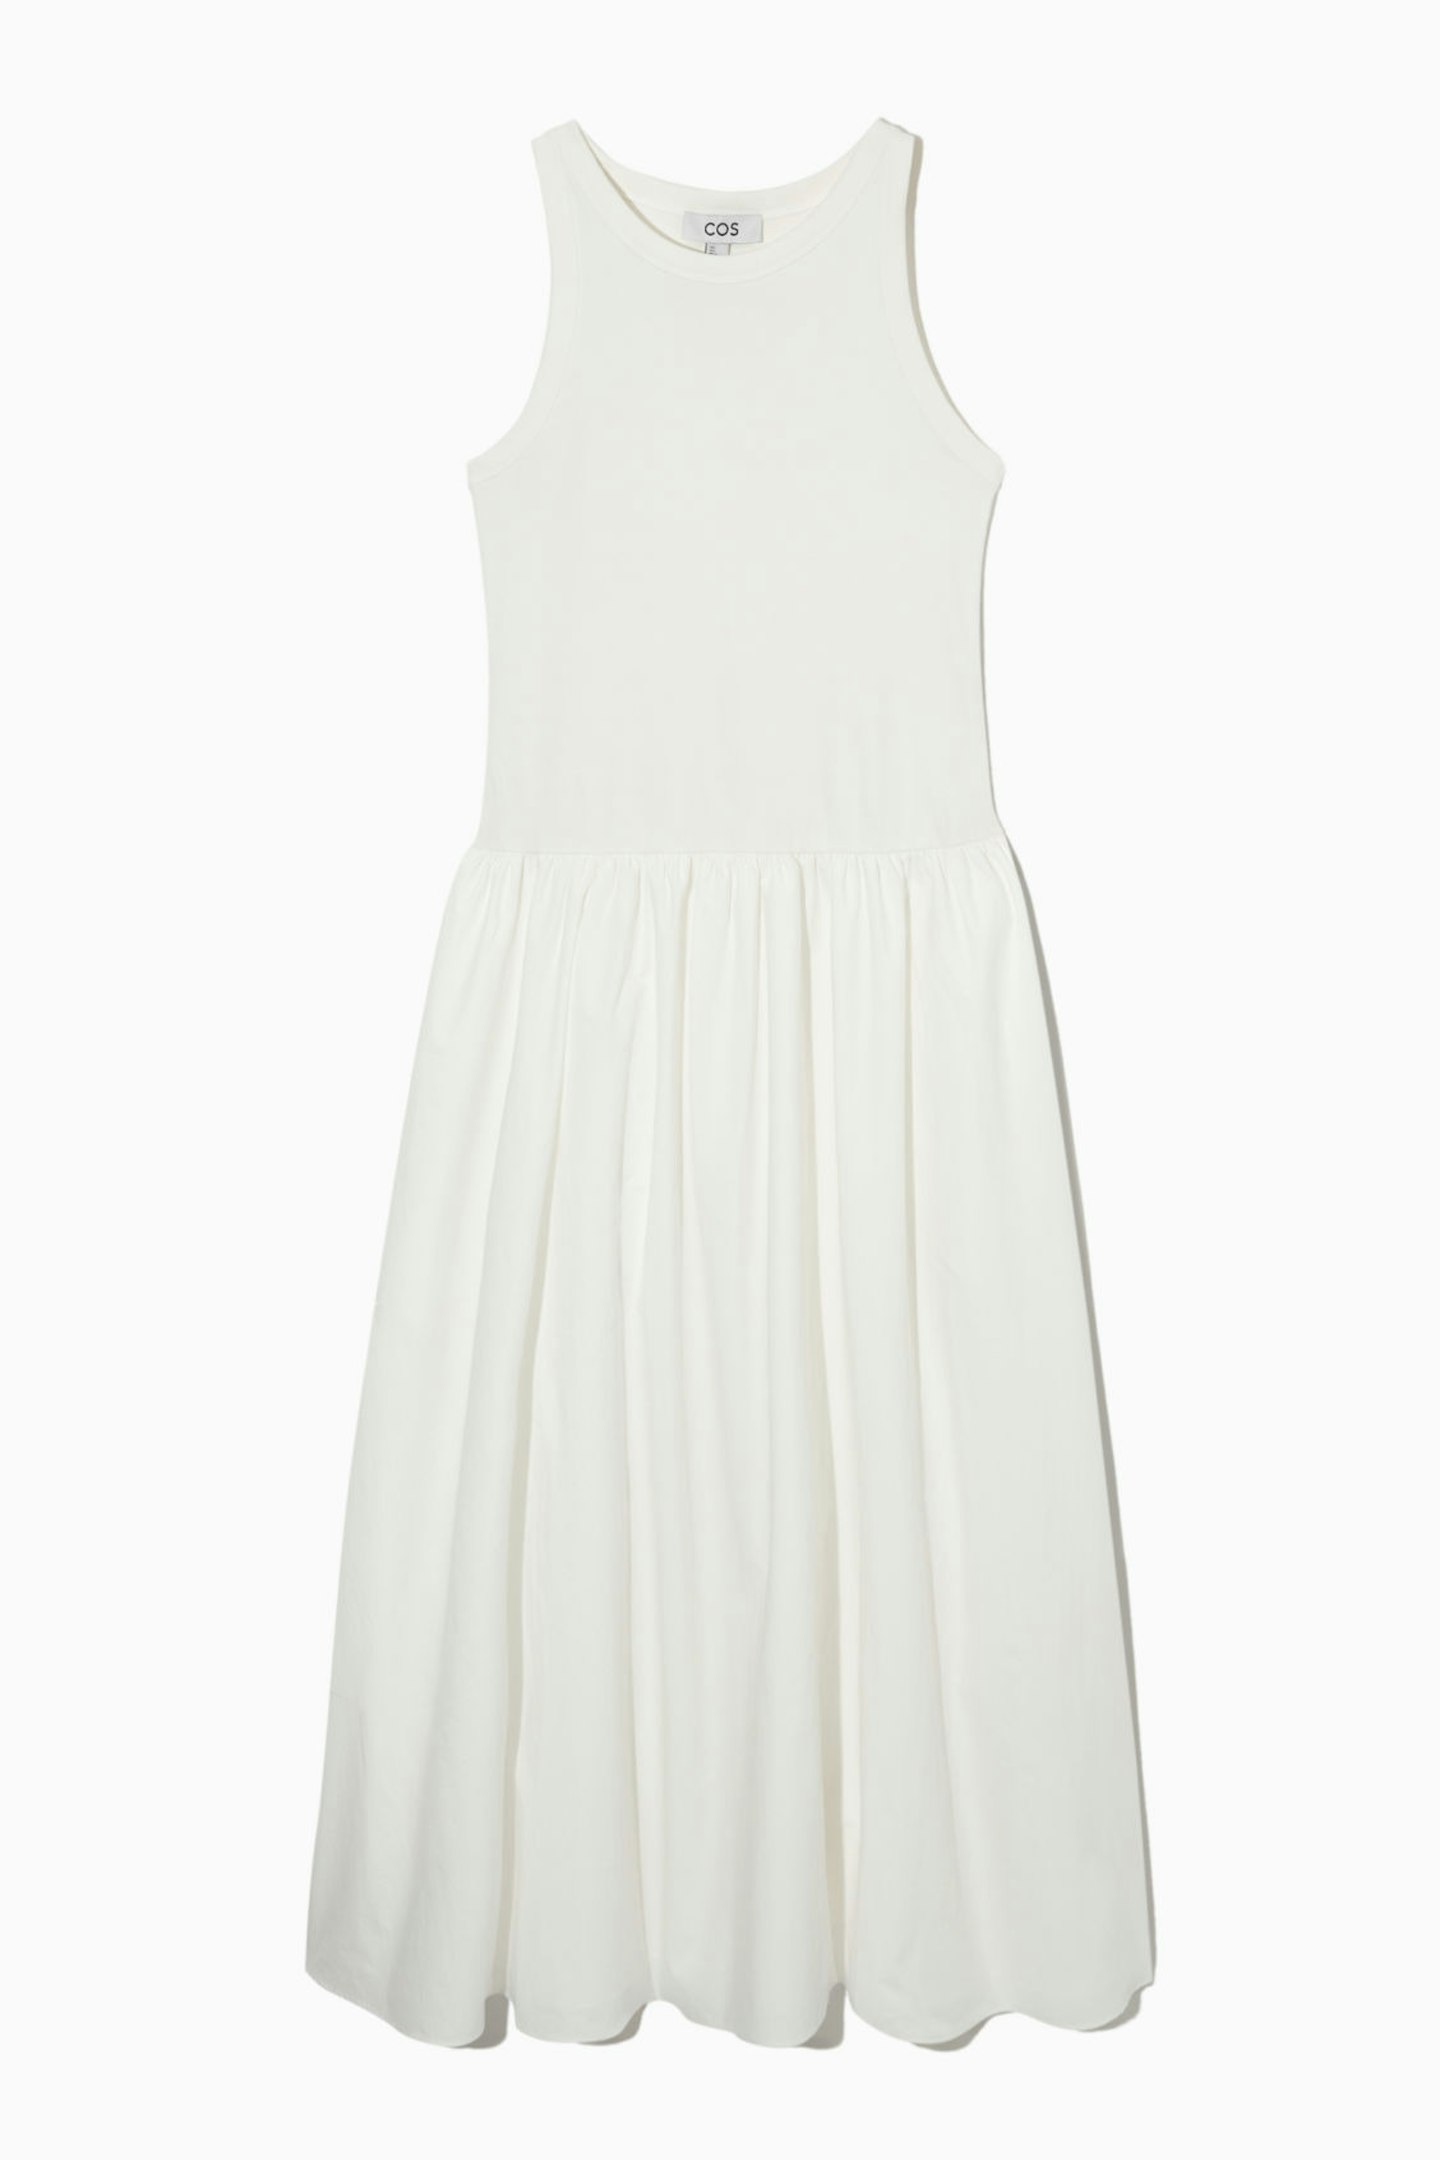 Sienna Miller's Wimbledon White Dress Is Still Available To Buy